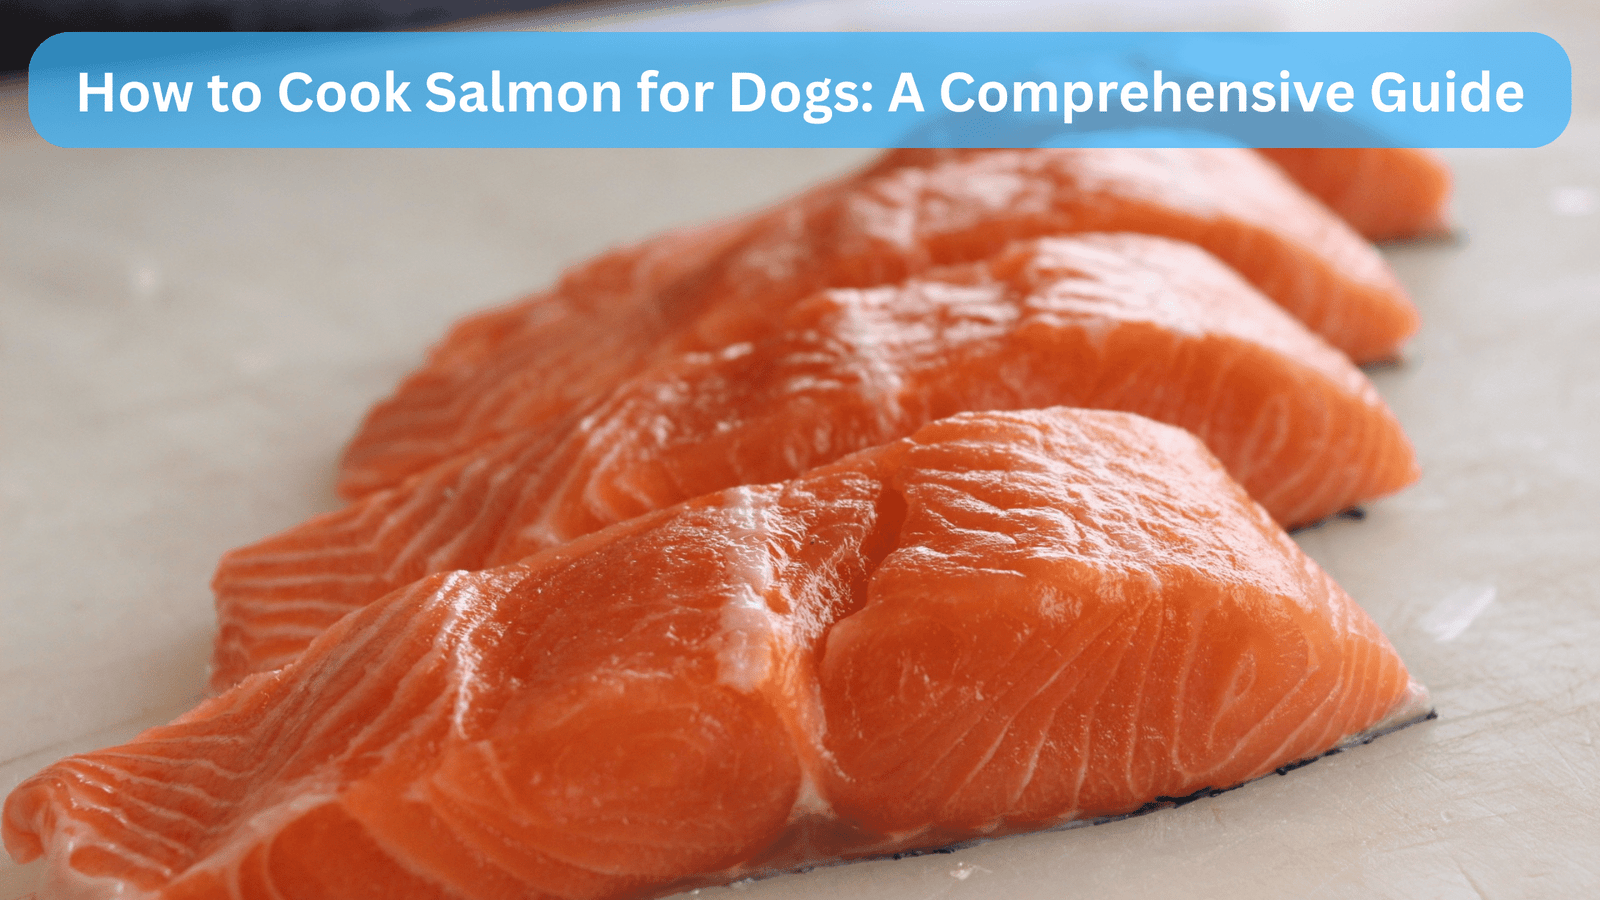 How to Cook Salmon for Dogs